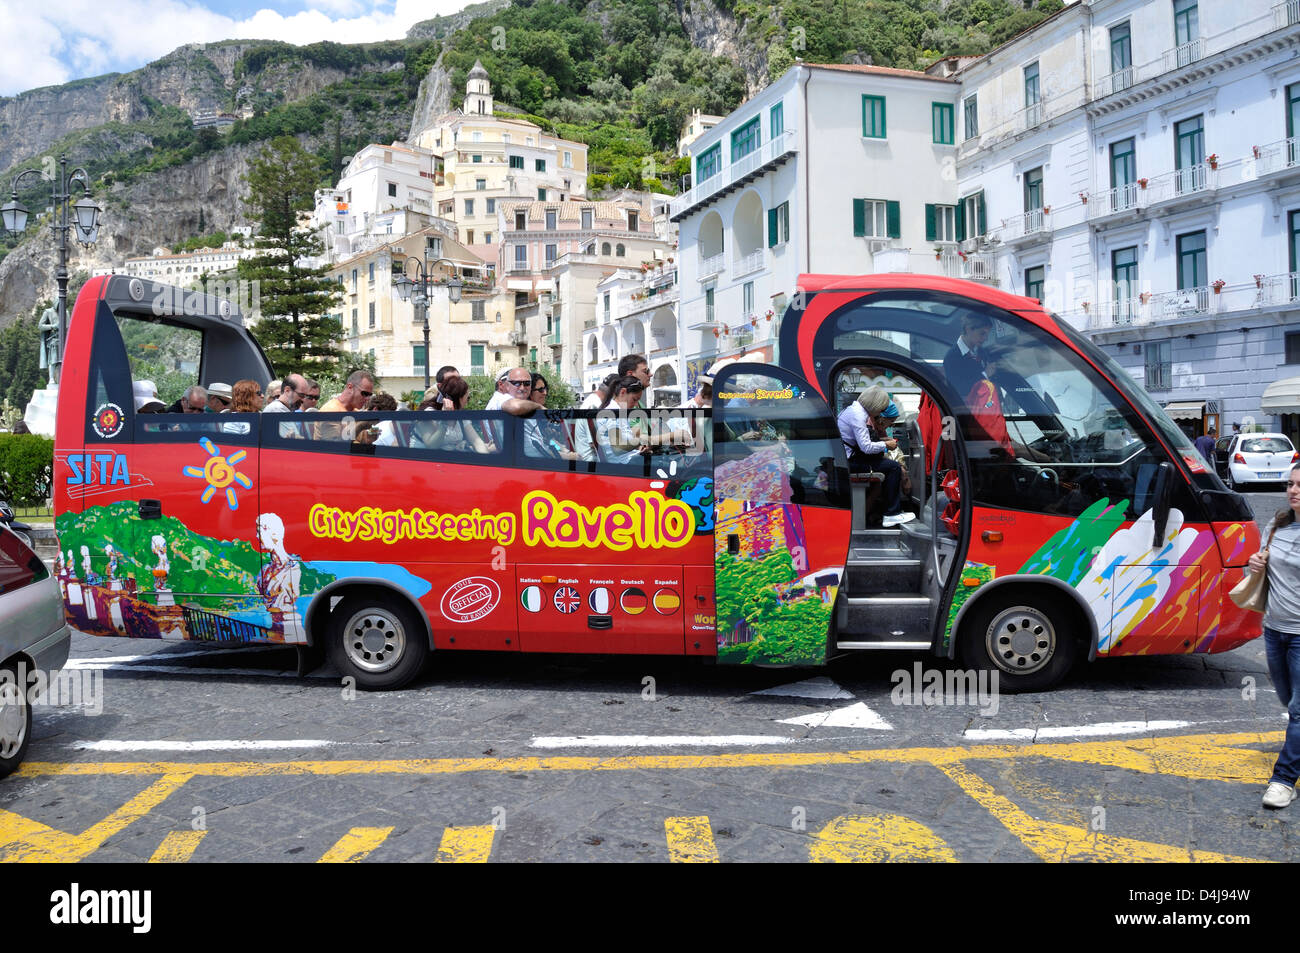 An open top sightseeing bus gets ready to depart from Piazza Flavio Gioia  in Amalfi, Italy Stock Photo - Alamy